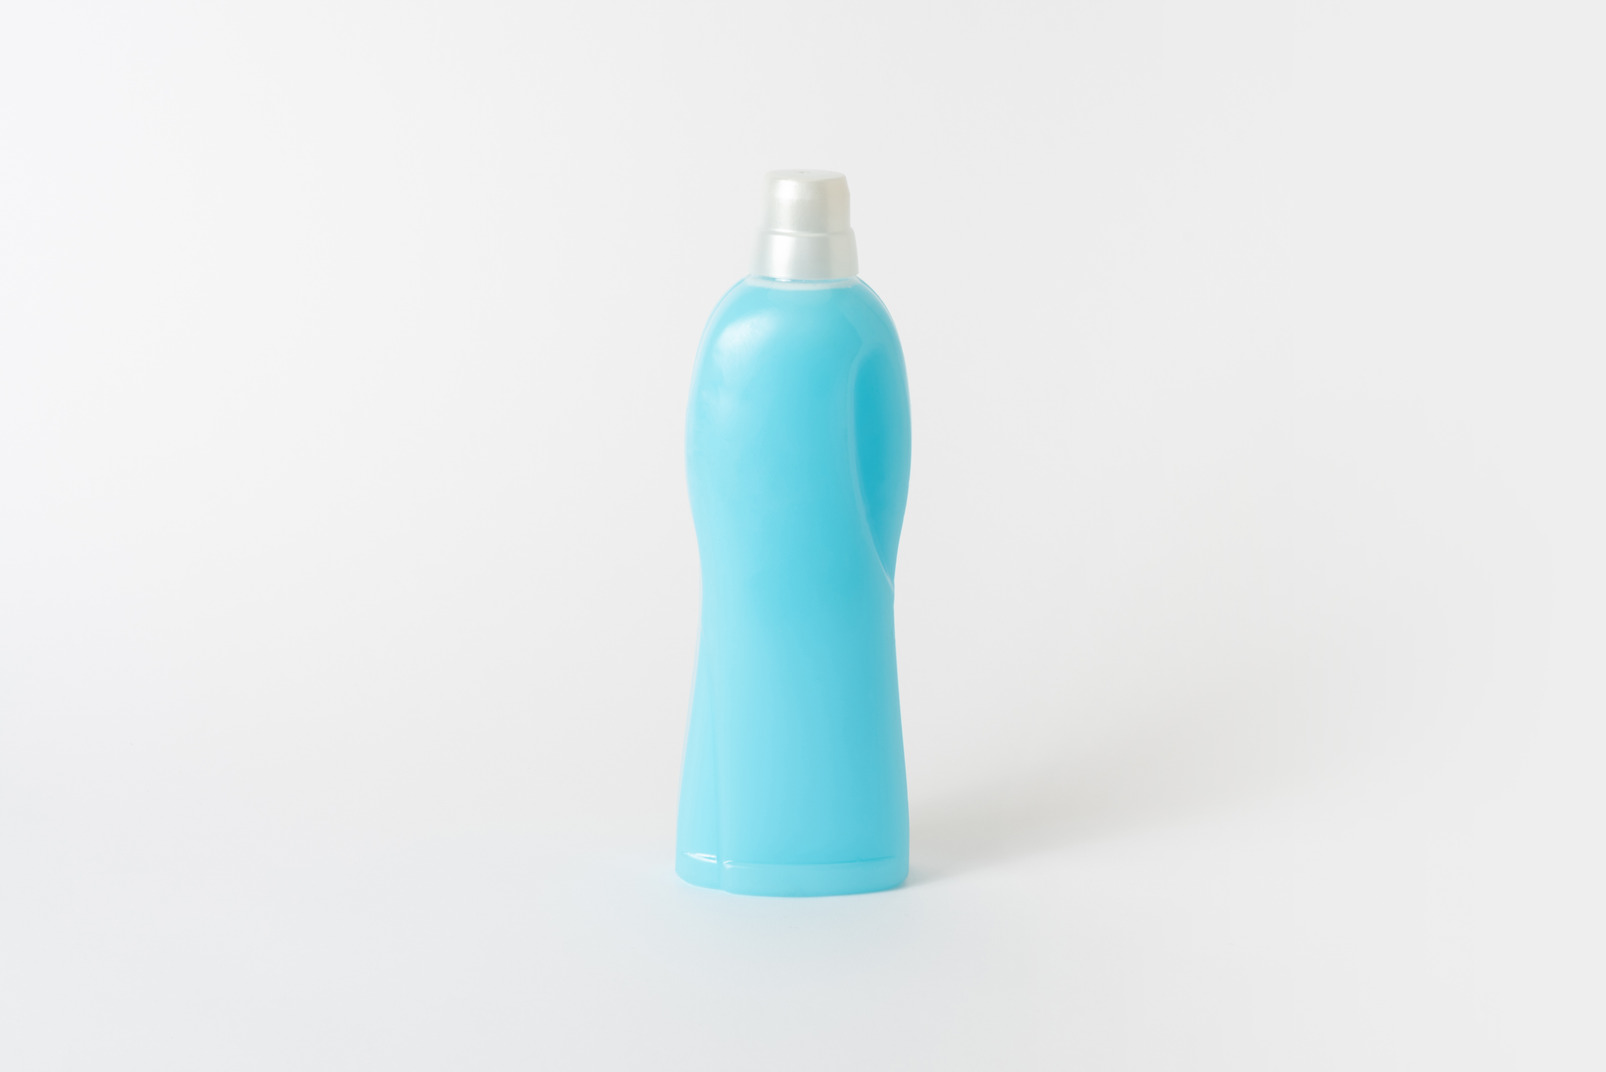 Blue household bottle with silver cap